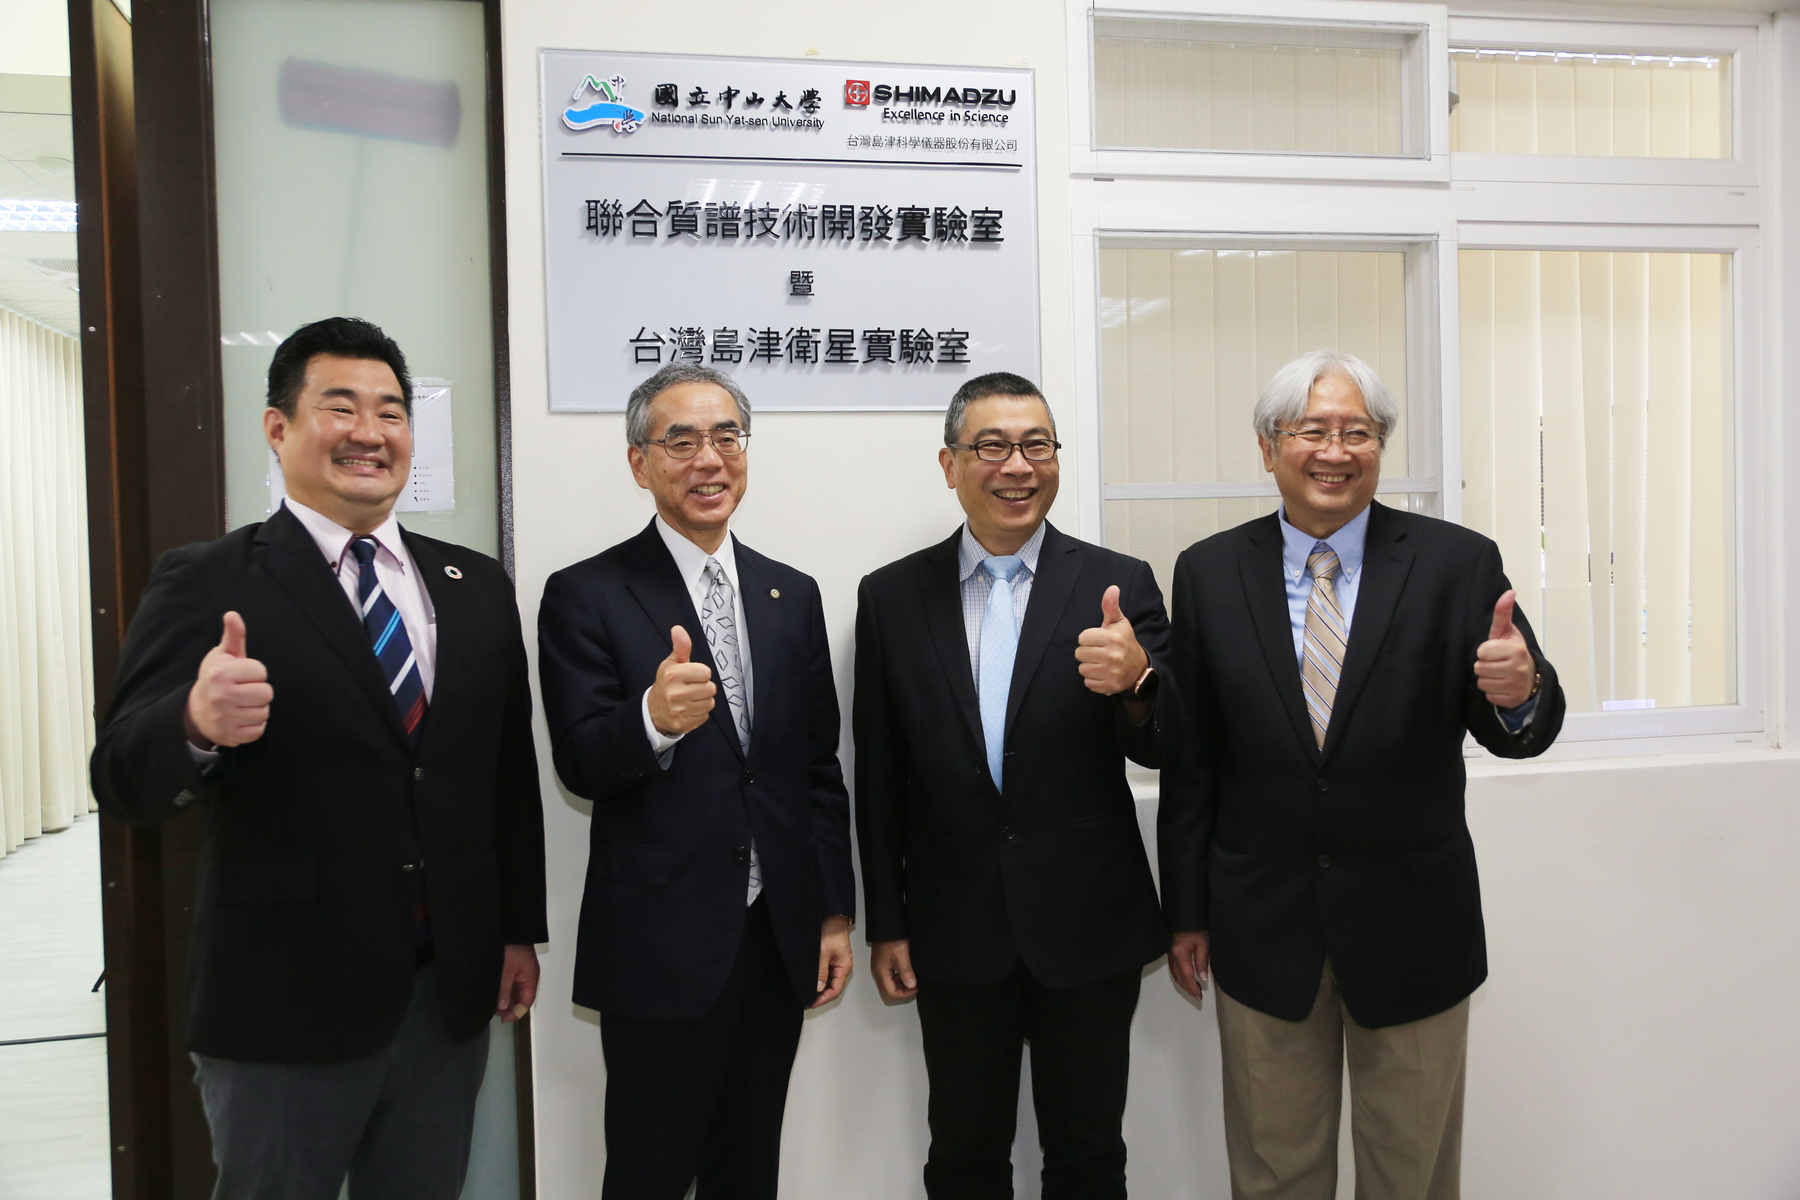 The Rapid Screening Research Center for Toxicology and Biomedicine (RSRCTB) at NSYSU officially announced the collaboration with Shimadzu Corporation, the largest analytical and measuring instruments manufacturer in Japan on March 10th, 2023, building the first Satellite Laboratory in Taiwan. From the left of the picture: Yosuke Hashimoto, President of Shimadzu Scientific Instruments (TAIWAN), Yasunori Yamamoto, President & CEO of Shimadzu Corporation, Chih-Wen Kuo, Senior Vice President at NSYSU, and Jentaie Shiea, Director of RSRCTB at NSYSU.